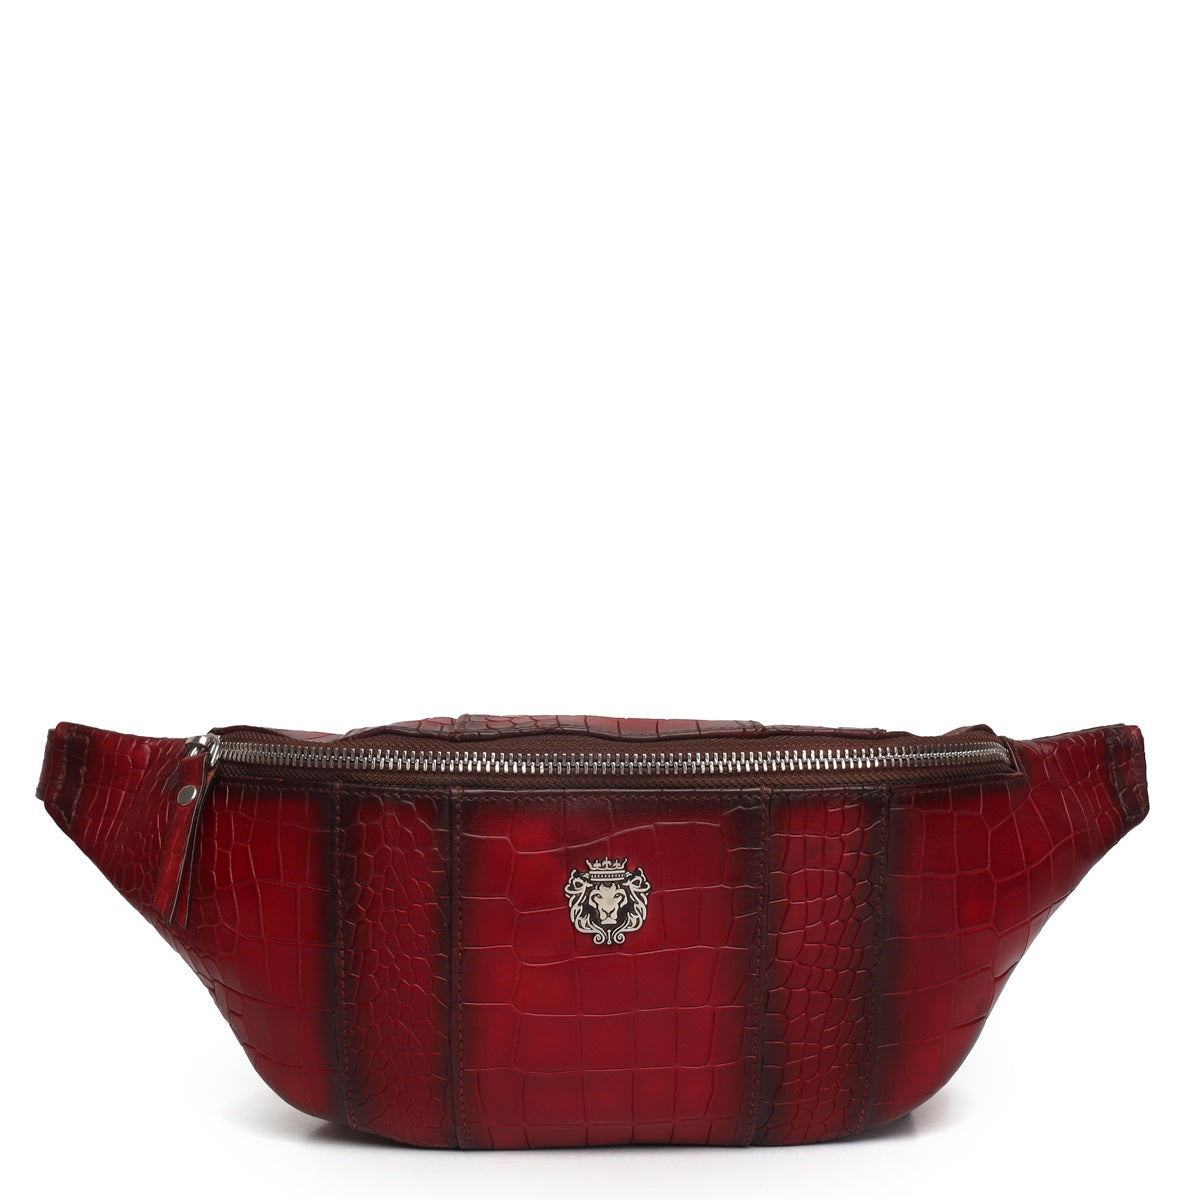 Wine Fanny Pack Bag In Croco Texture Leather